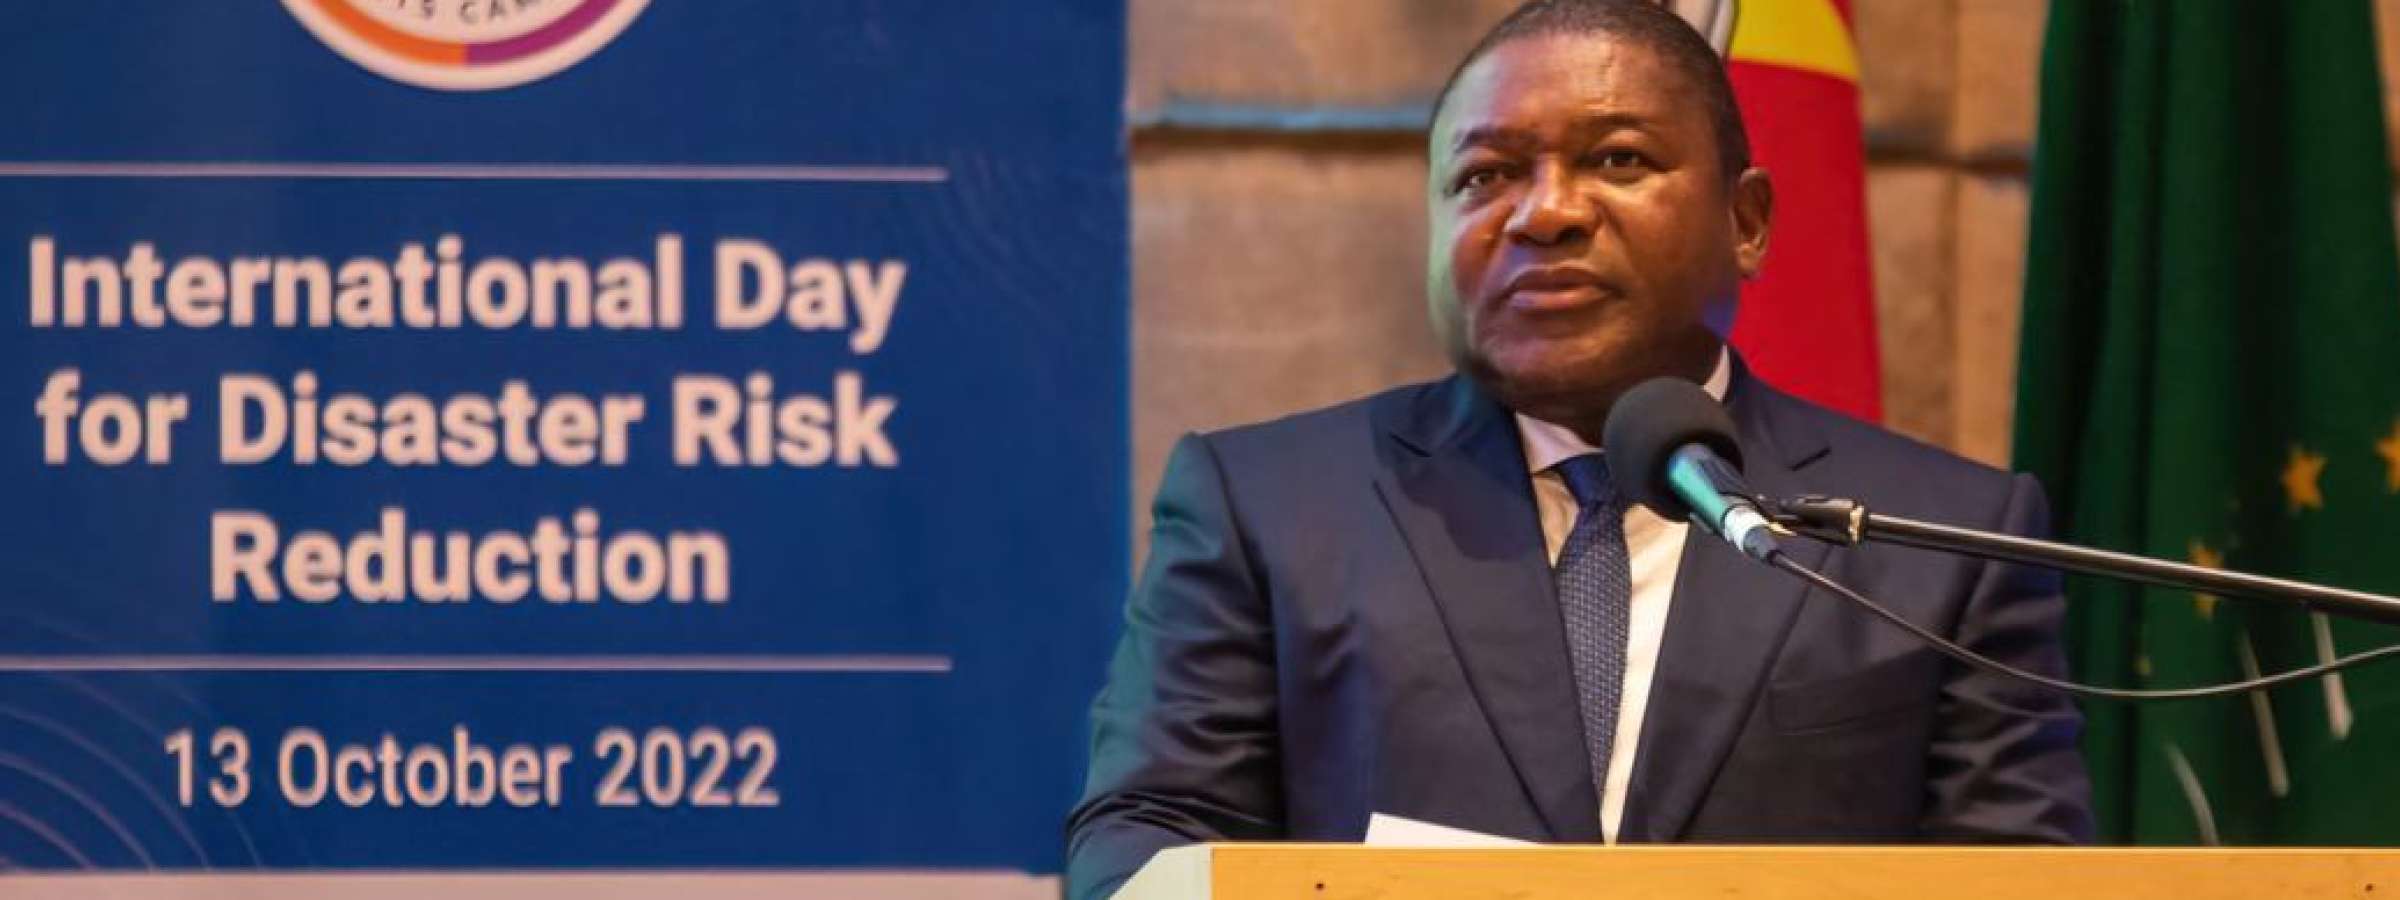 President Nyusi at the 2022 International Disaster Risk Reduction Day commemorations in Maputo